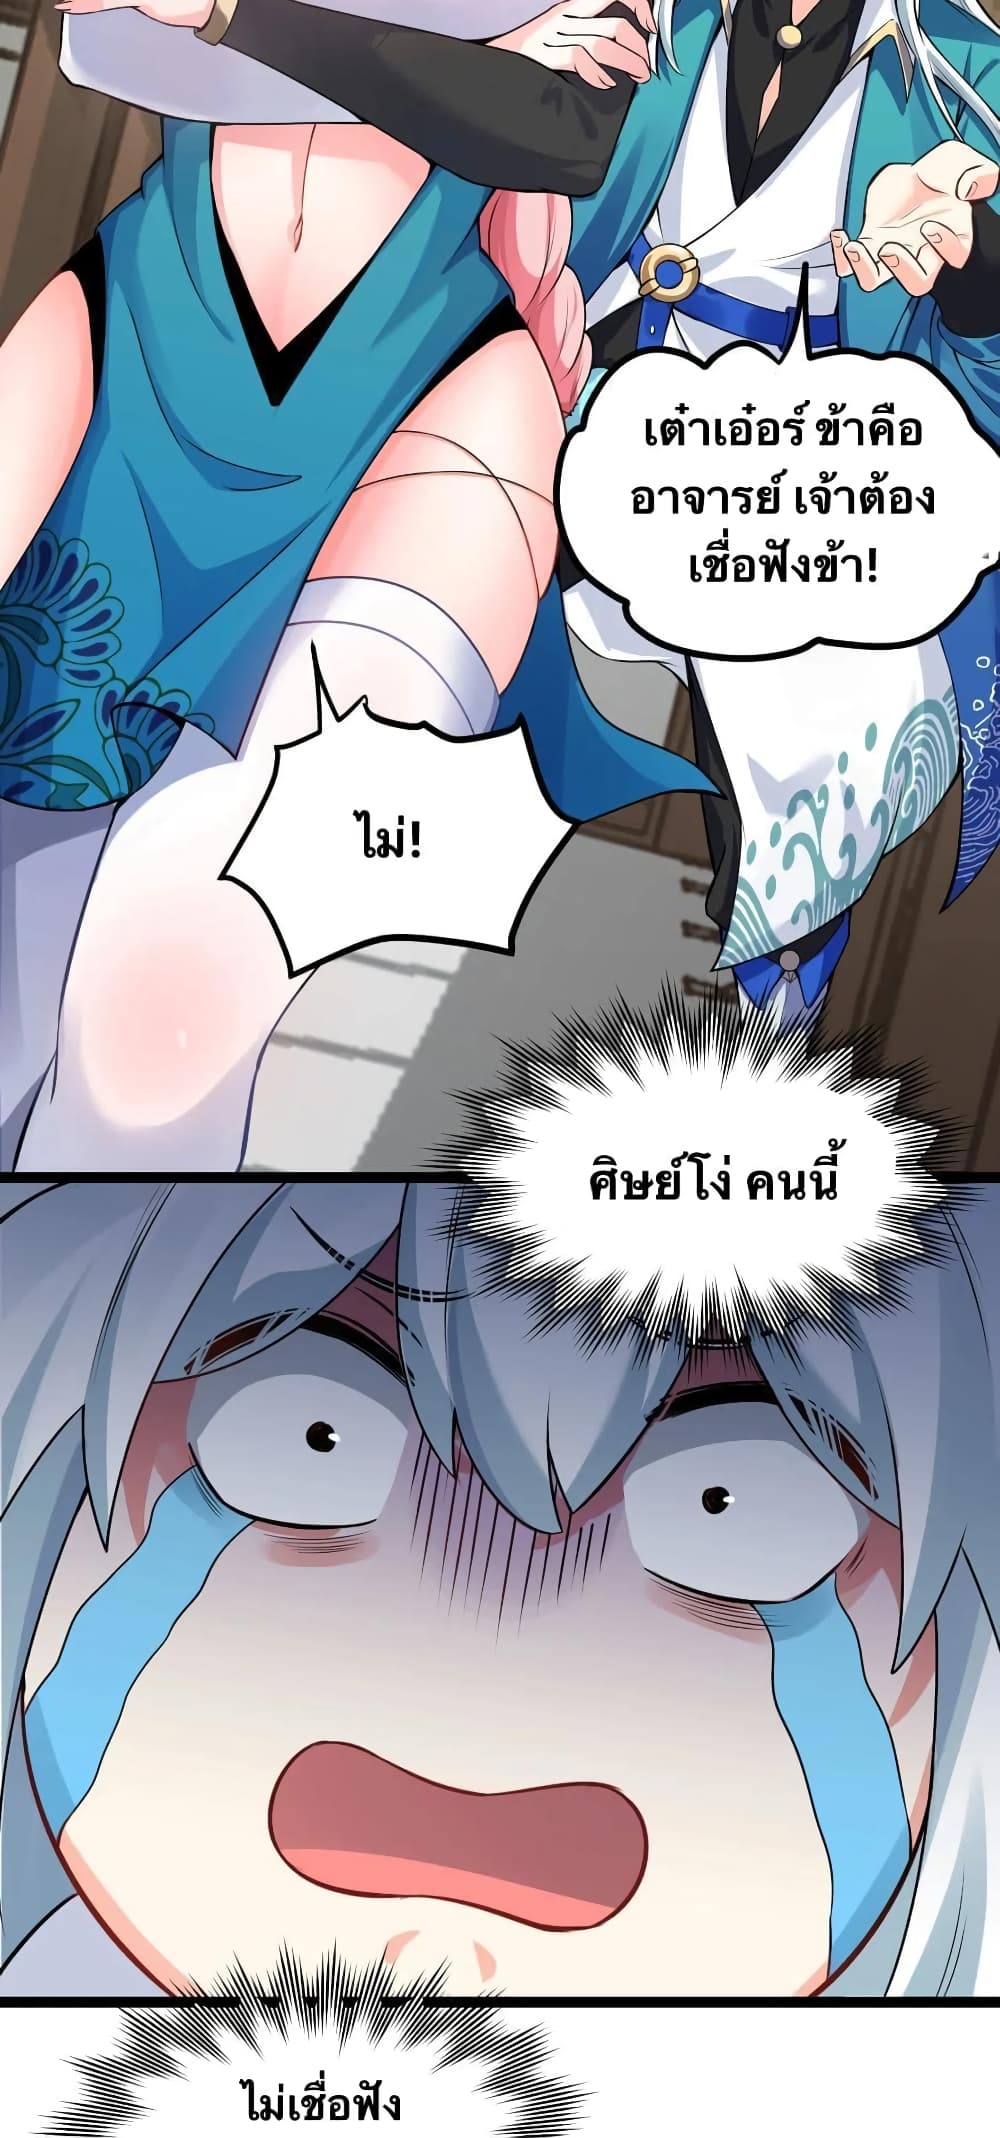 Godsian Masian from Another World ตอนที่ 94 (39)